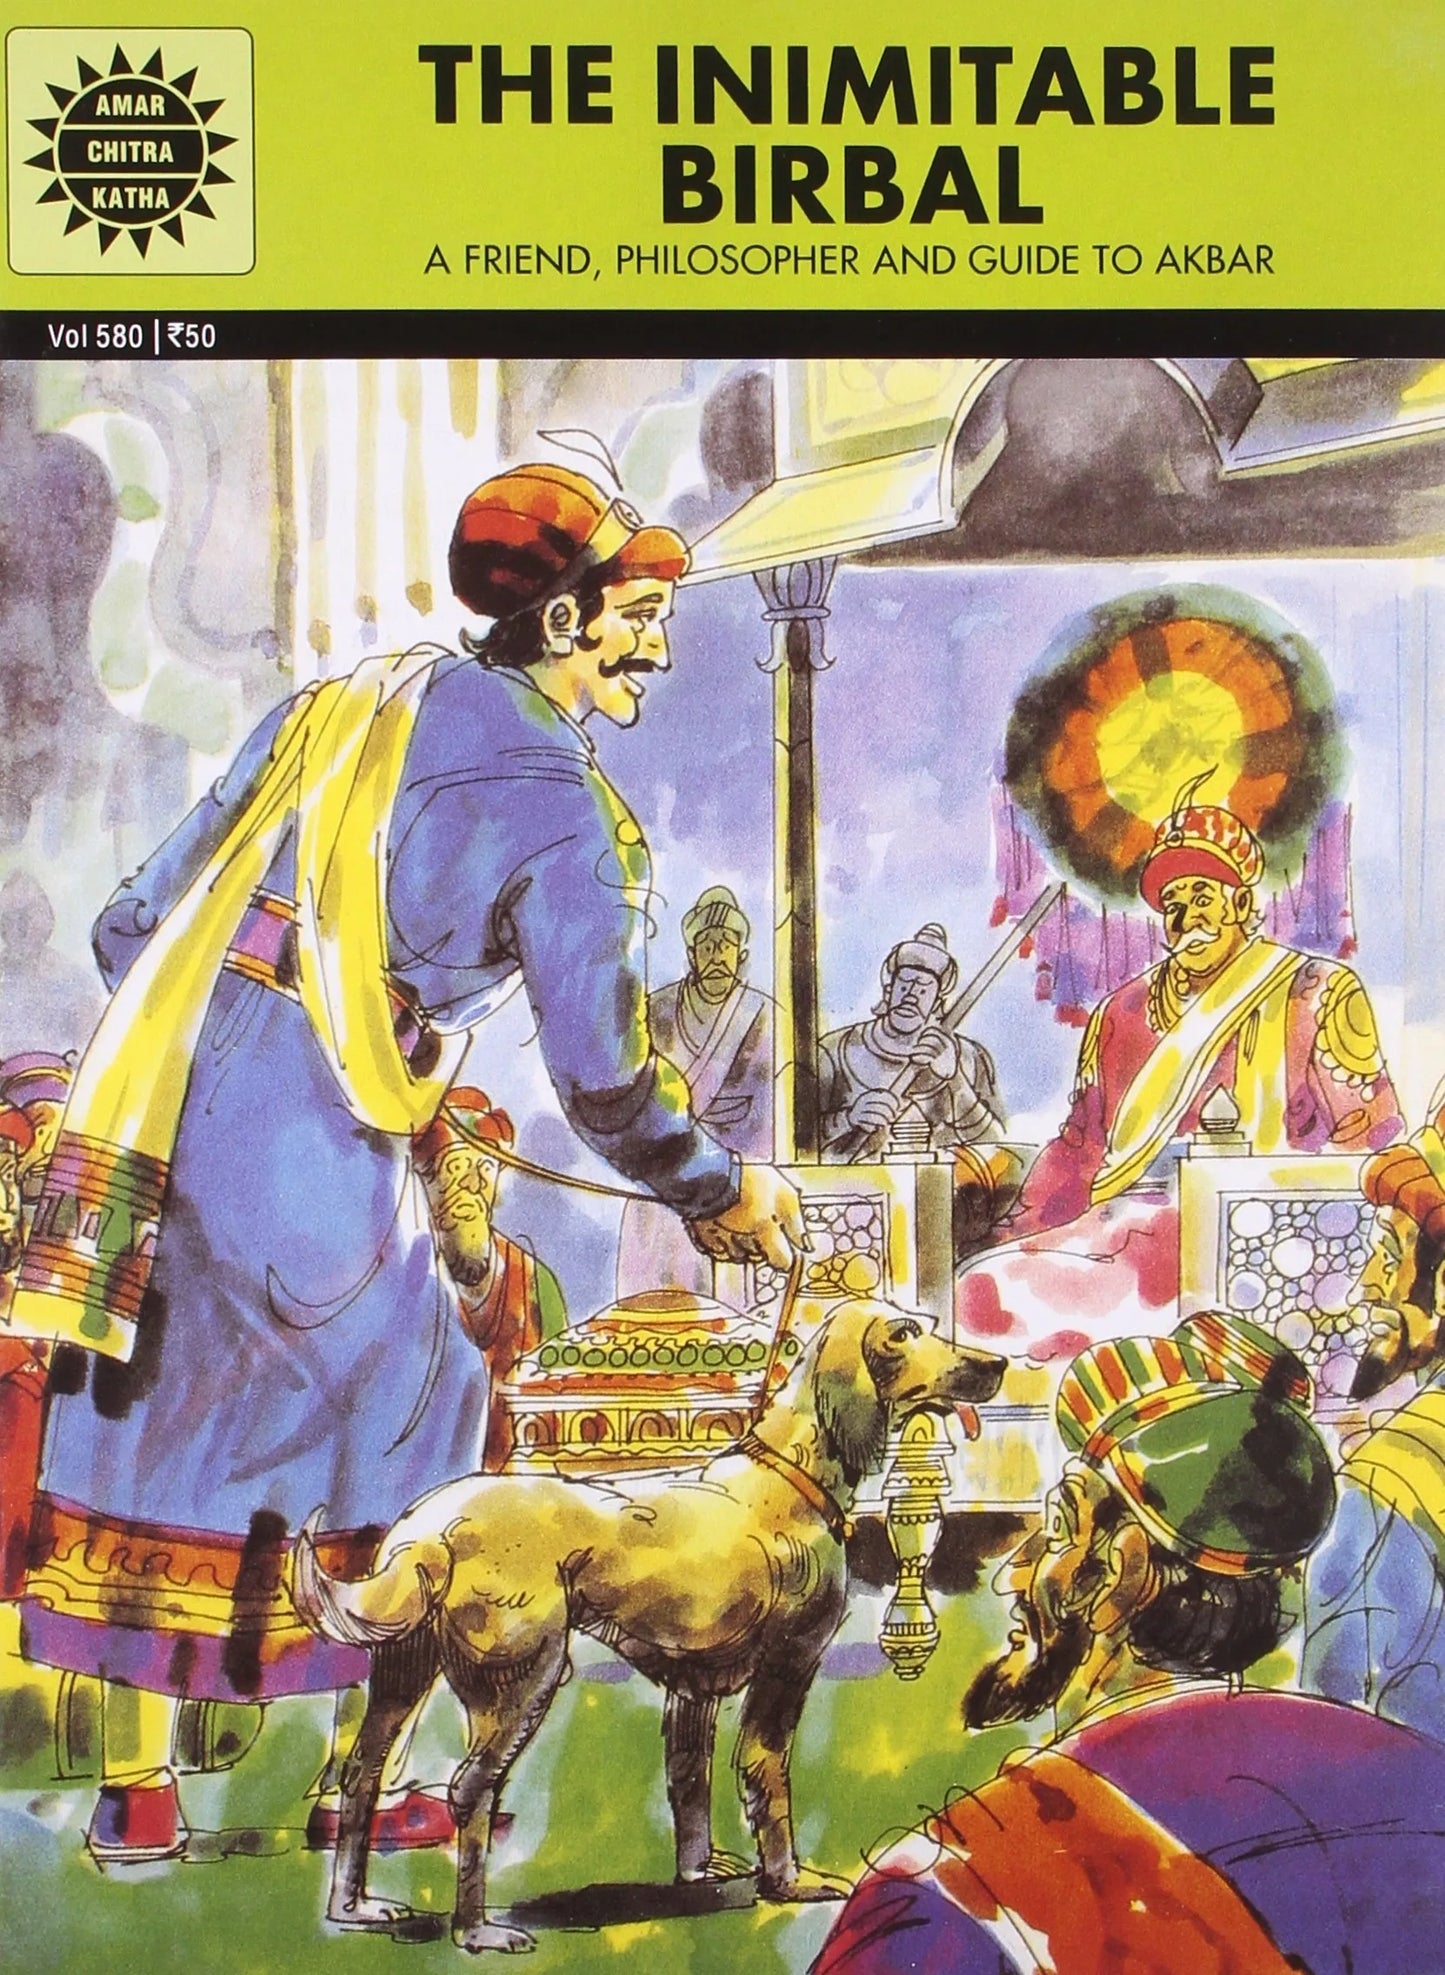 Amar Chitra Katha - The Inimitable Birbal - A Friend, Philosopher and a Guide to Akbar